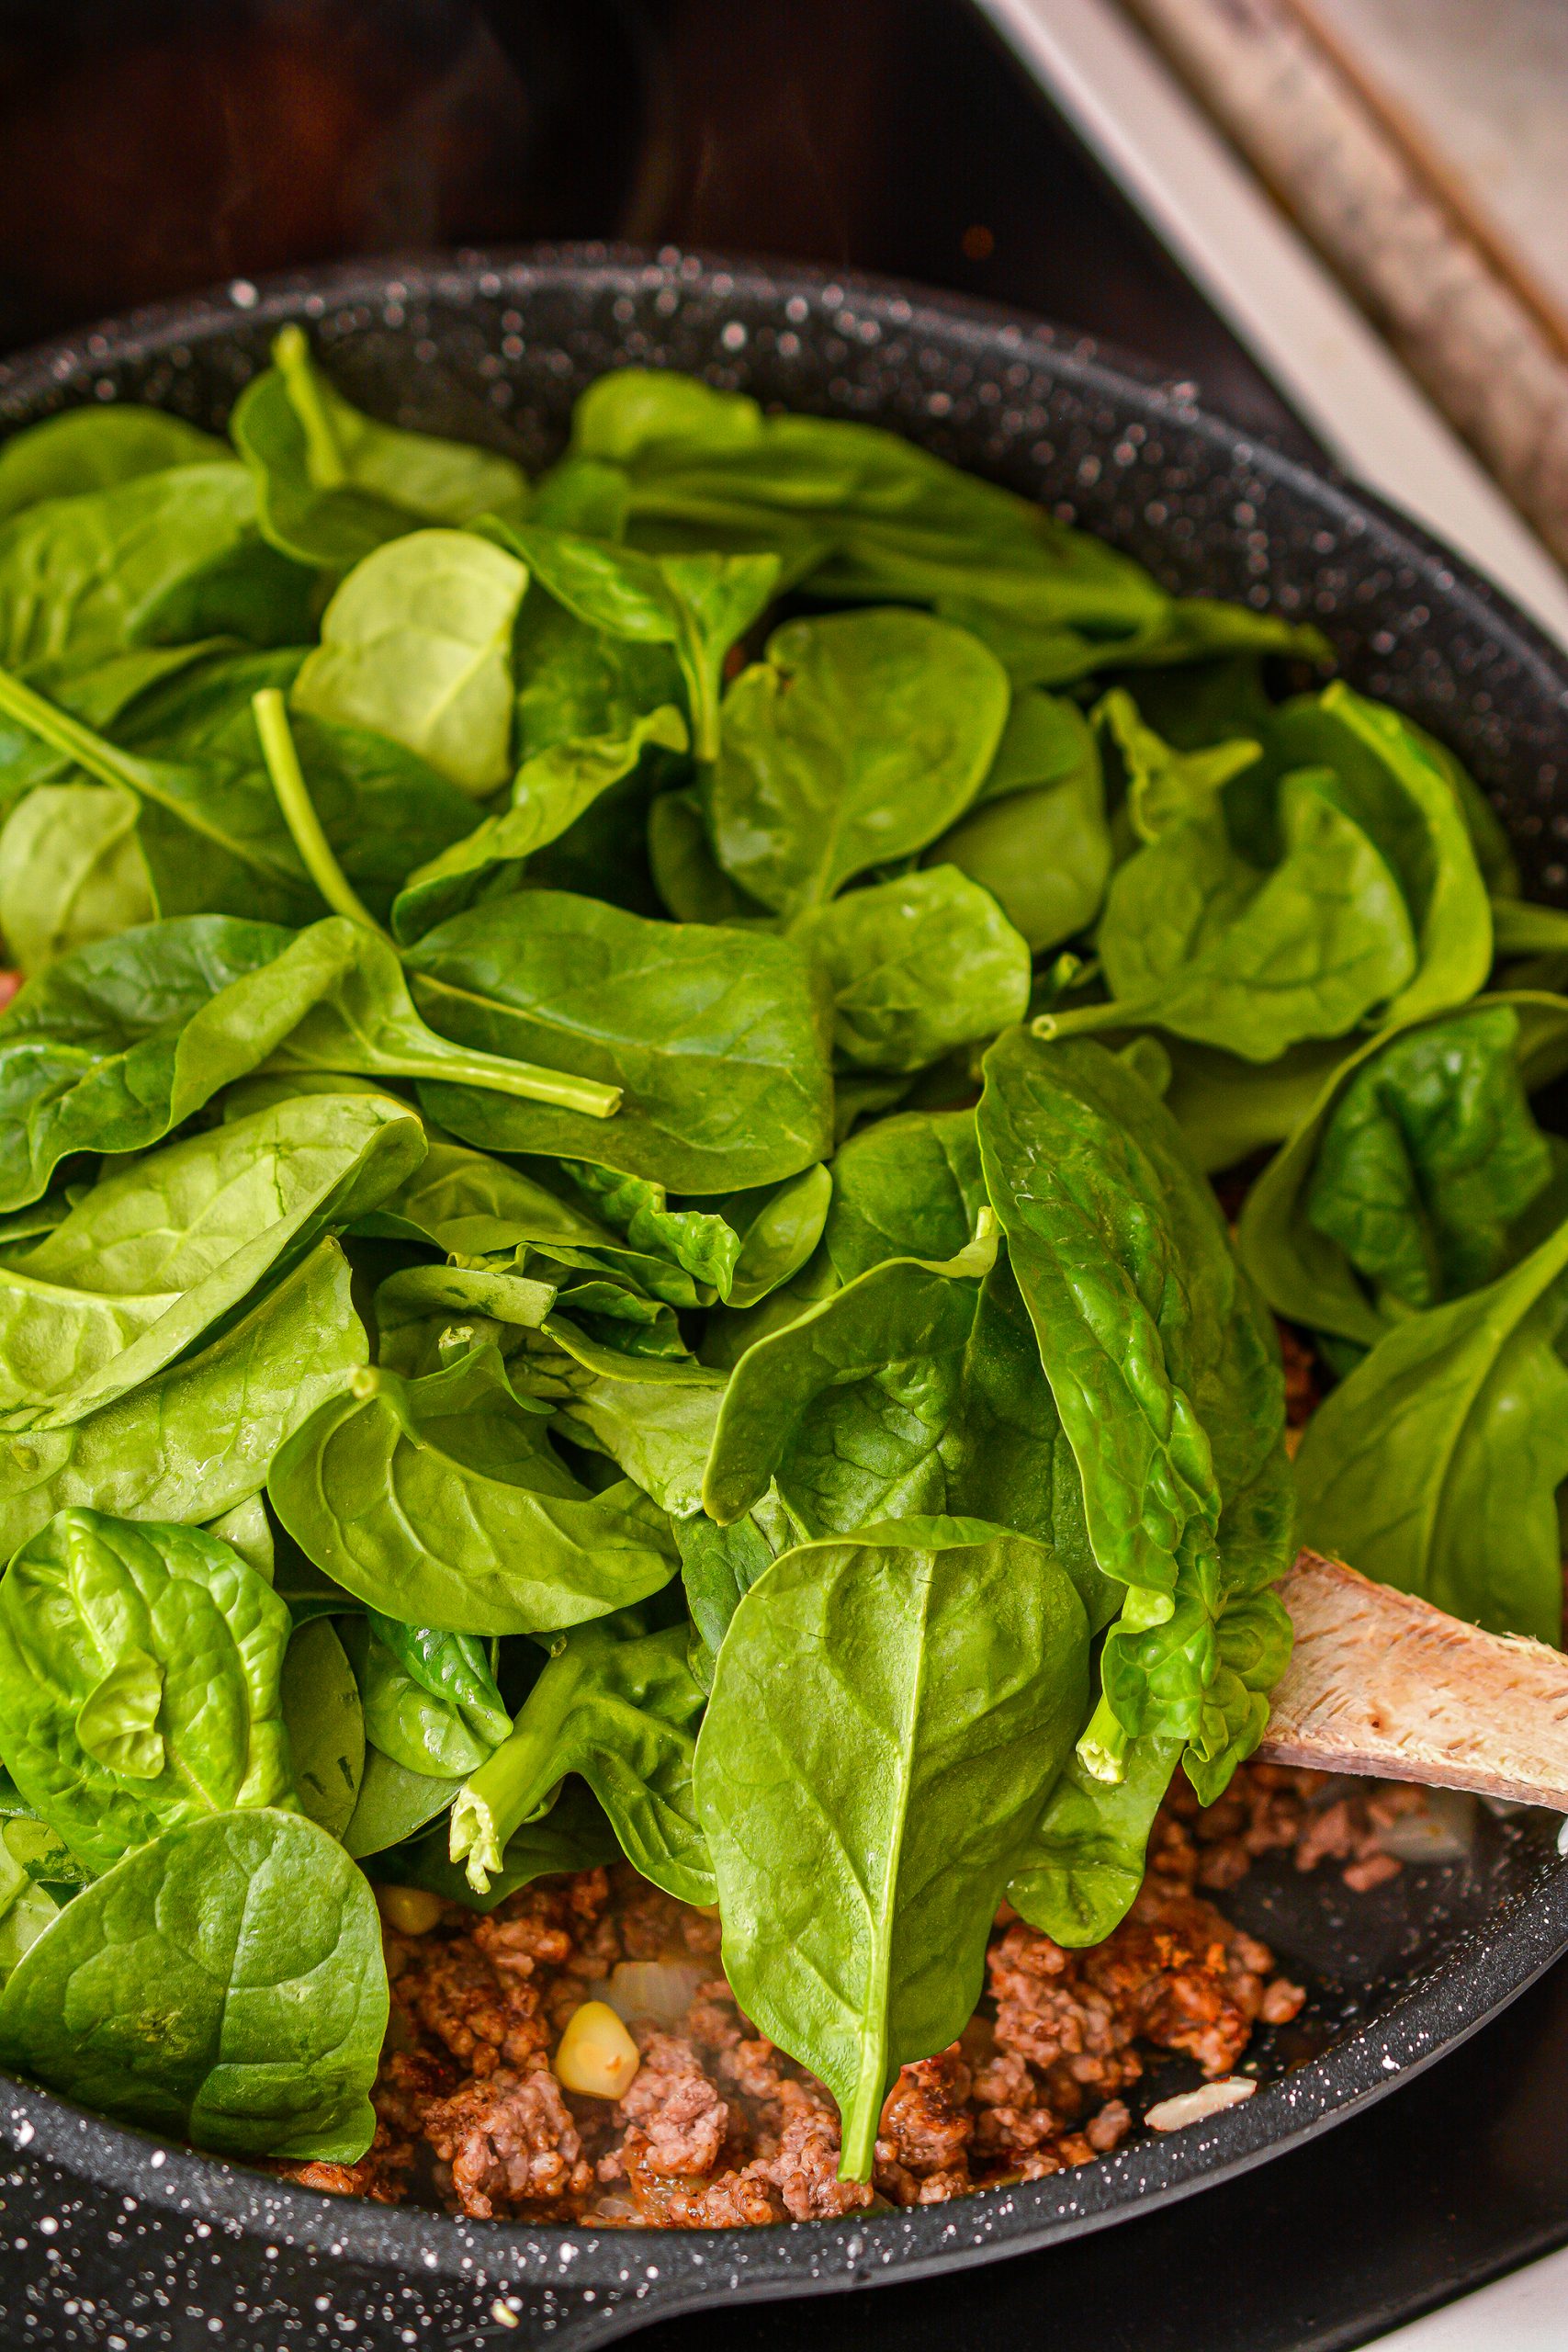 Mix in the taco seasoning, corn, and spinach until the spinach has completely melted.